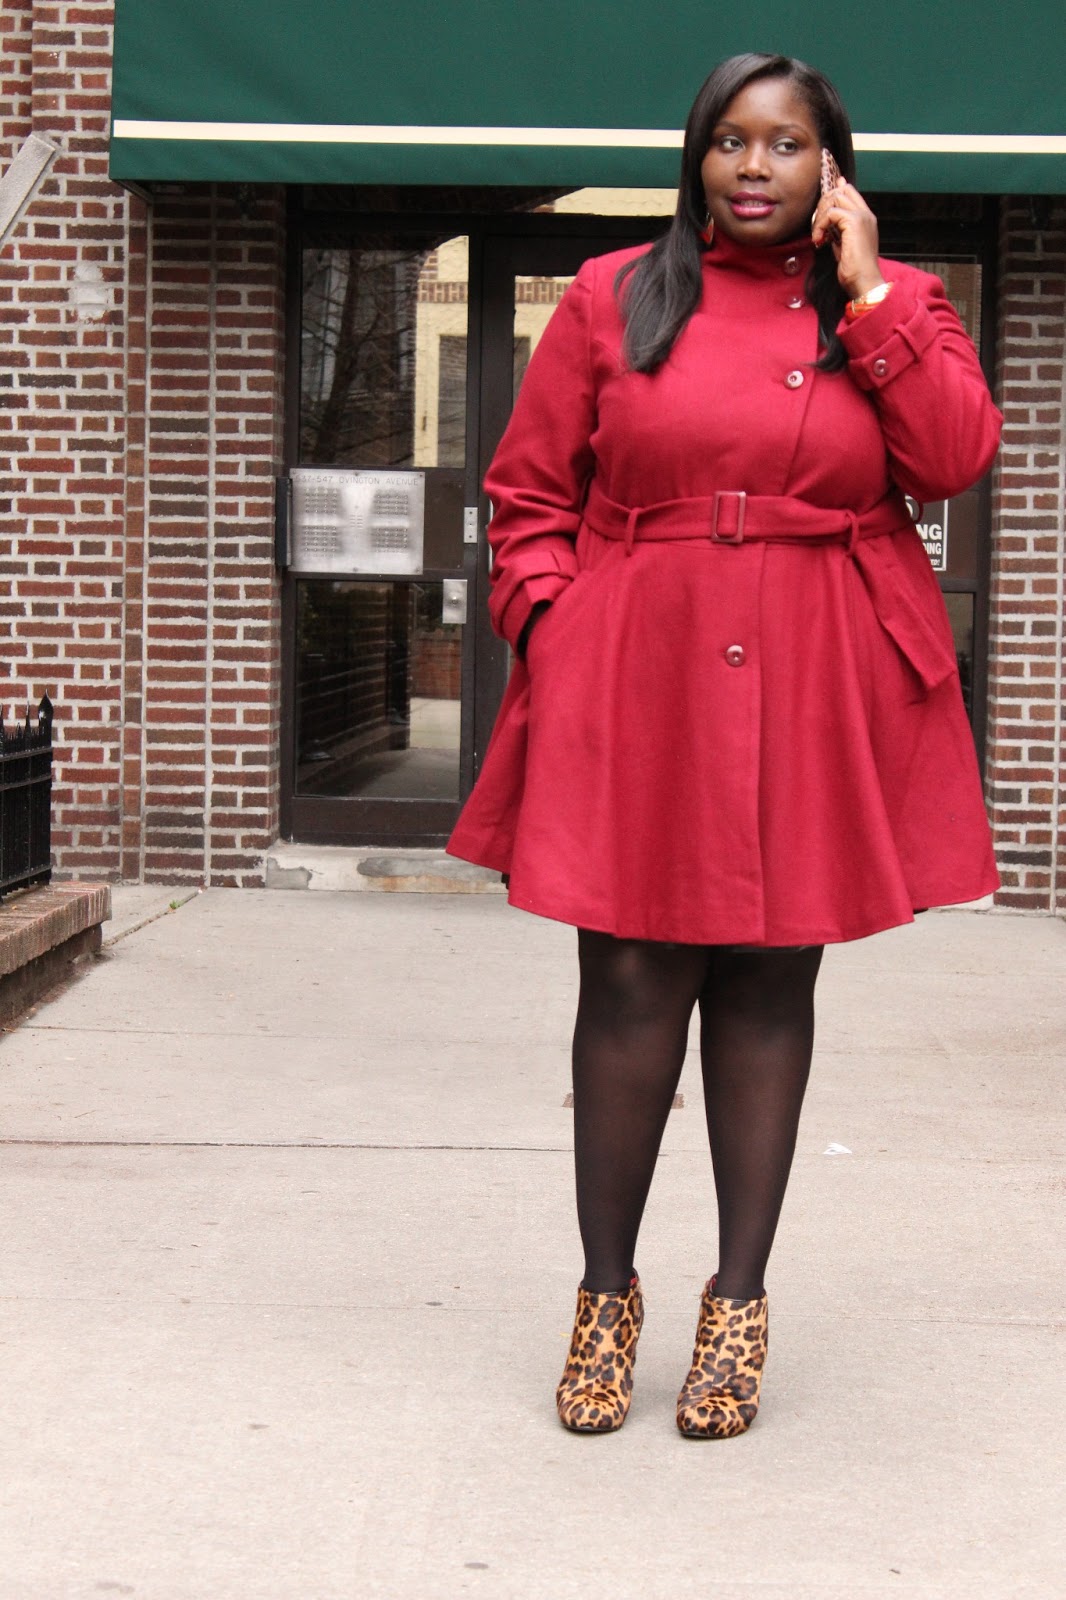 Plus Size Fit and Flare Coats - The Untidy Closet  Fit and flare coat,  Flattering plus size dresses, Plus size winter outfits